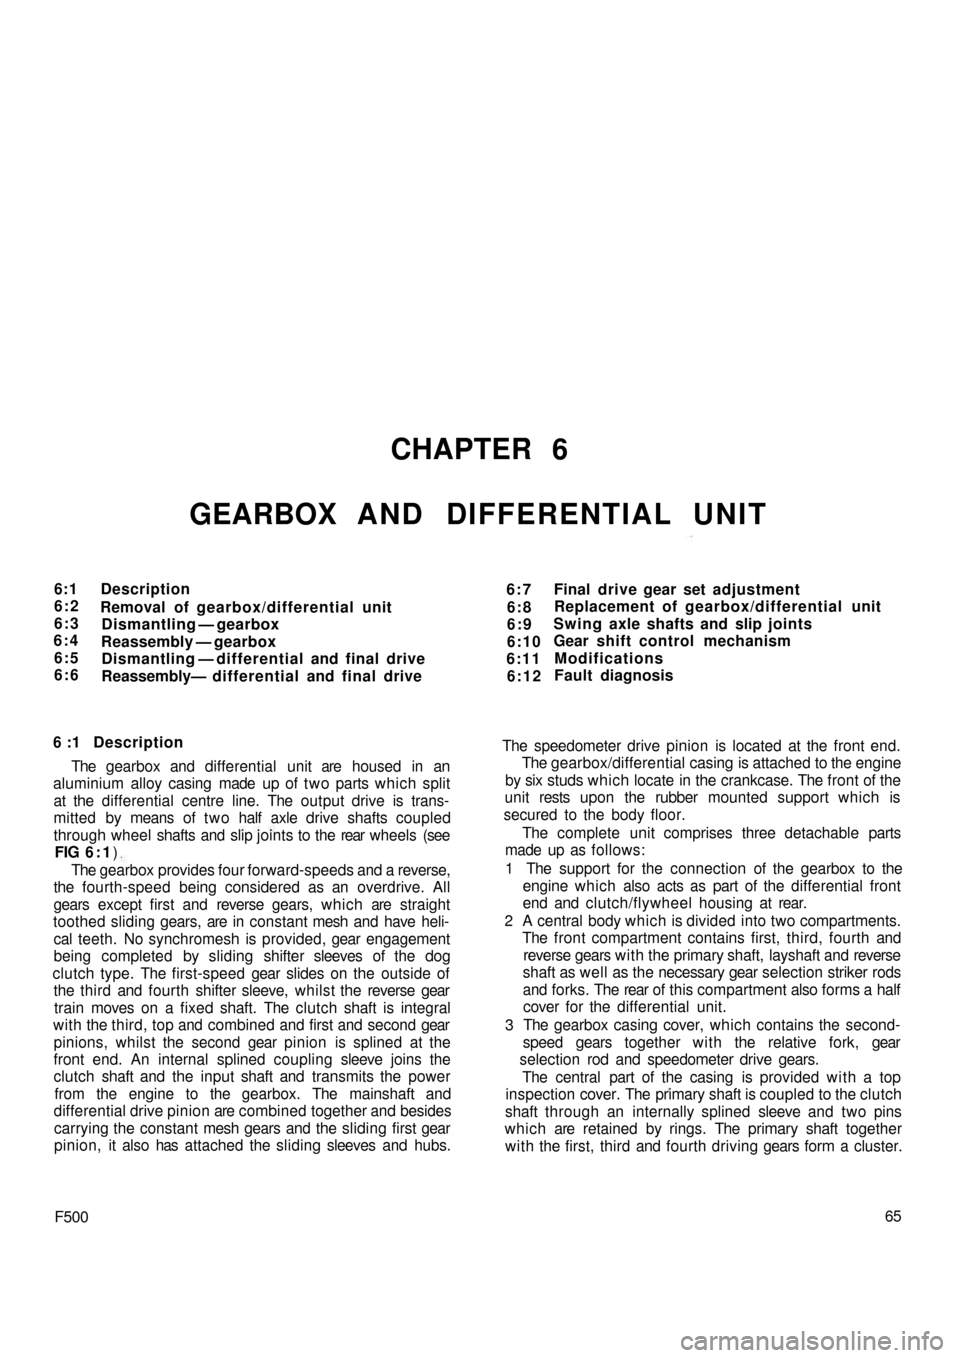 FIAT 500 1973 1.G Workshop Manual CHAPTER 6
GEARBOX AND DIFFERENTIAL UNIT
6:1
6:2
6:3
6:4
6:5
6:6Description
Removal of gearbox/differential unit
Dismantling — gearbox
Reassembly — gearbox
Dismantling — differential and final dr